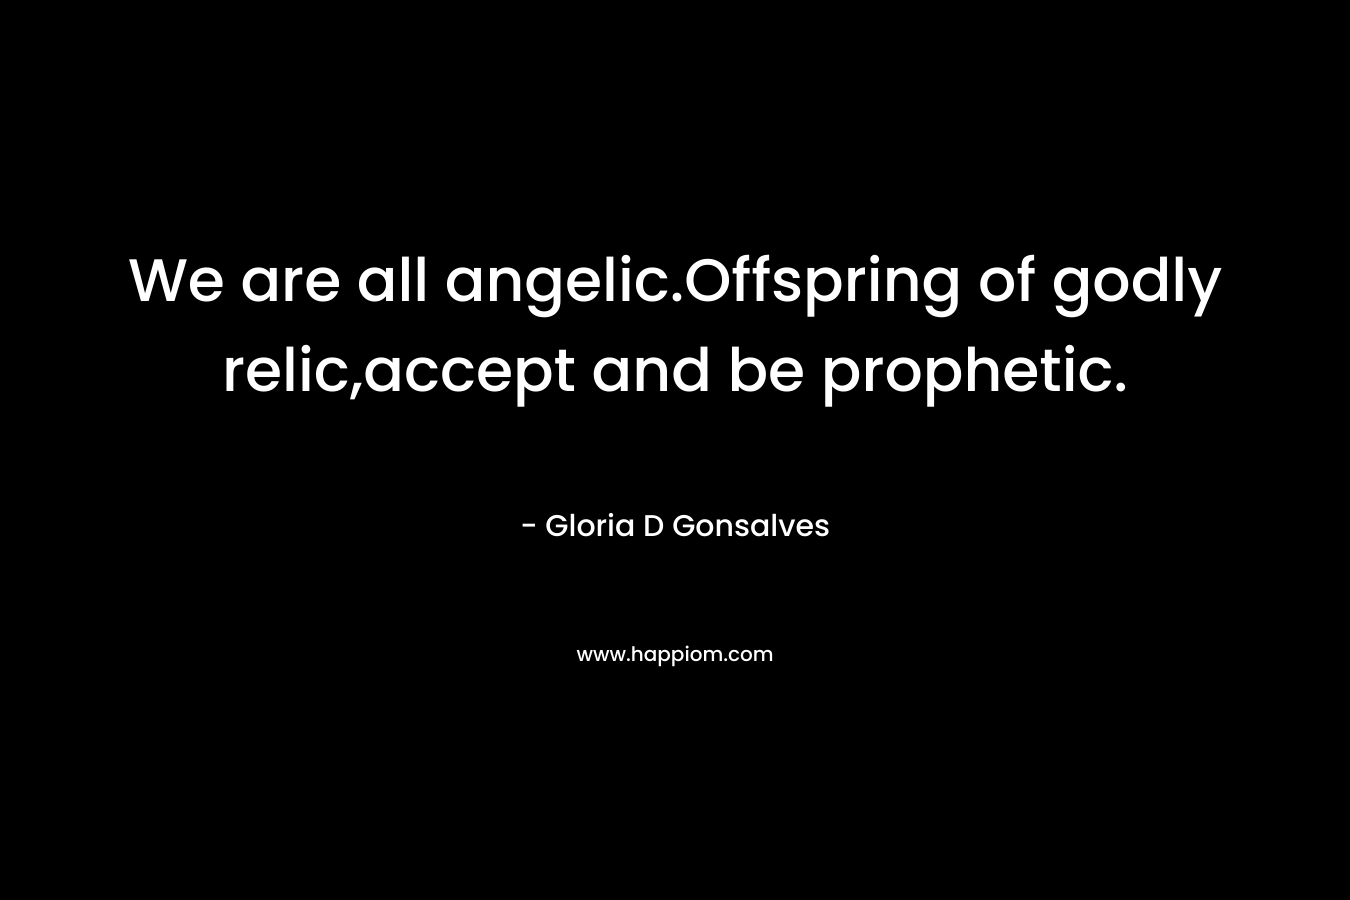 We are all angelic.Offspring of godly relic,accept and be prophetic.